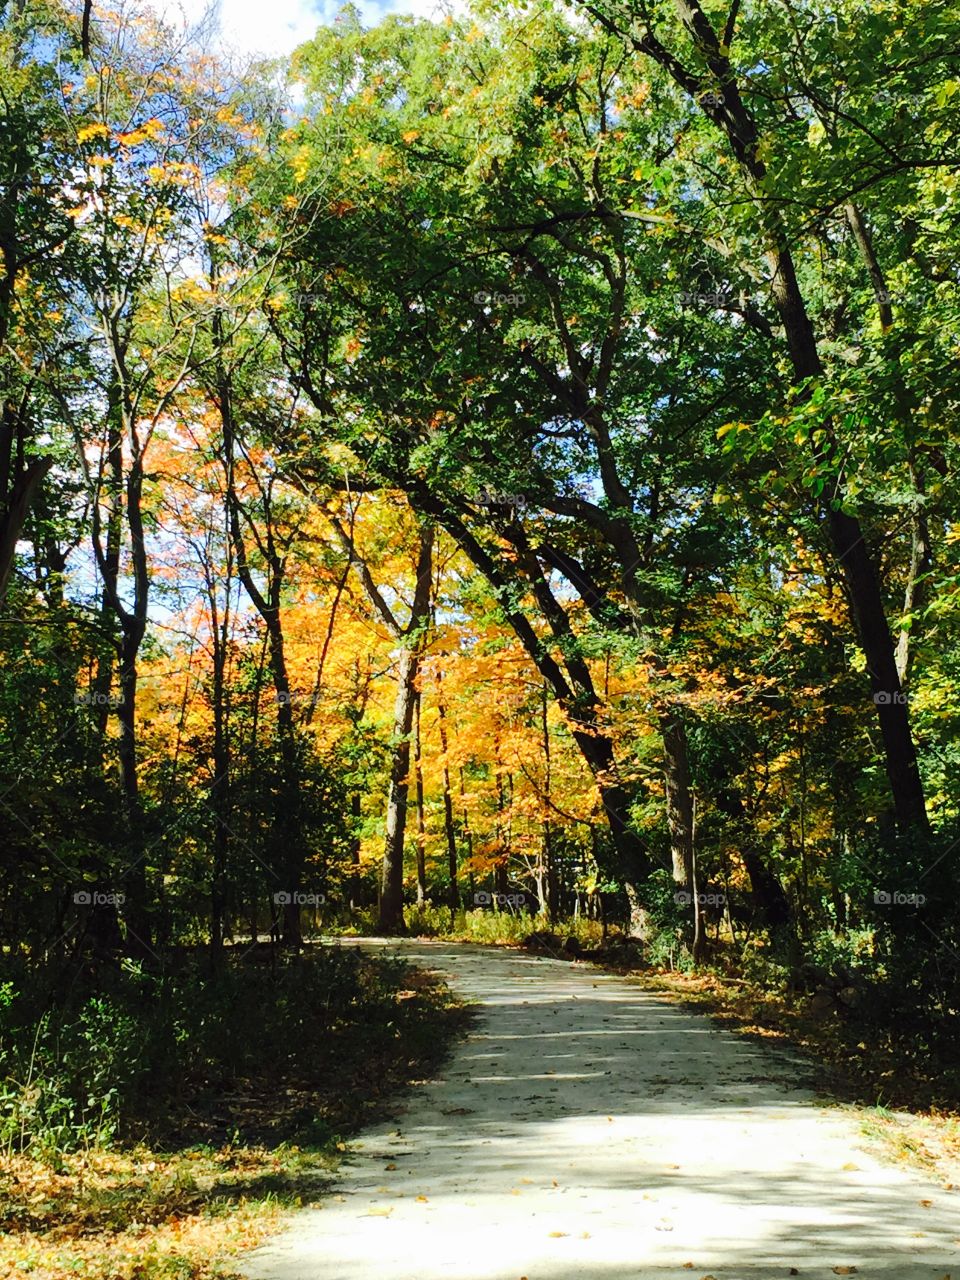 A Walk in the Park. Nothing like a relaxing walk through quiet woods with autumn's color sparkling.